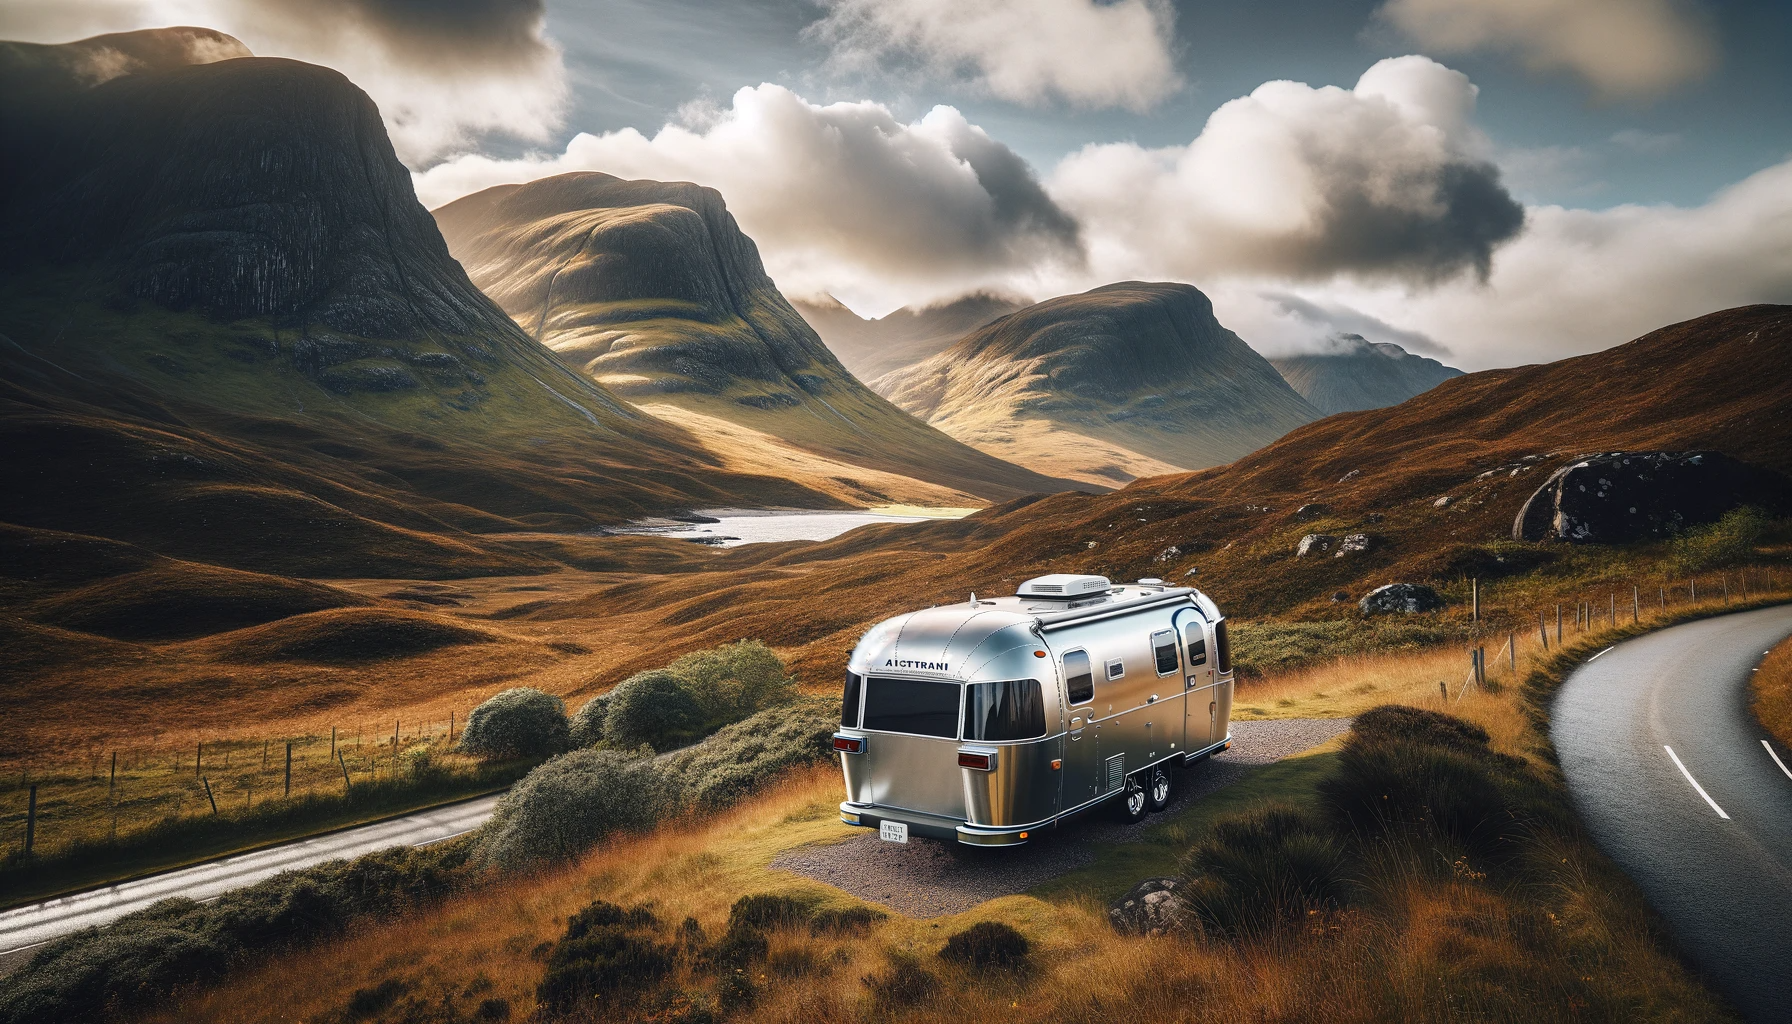 A scenic image of an Airstream caravan parked in the picturesque Scottish Highlands, showcasing the dramatic landscape and the caravan's sleek design.